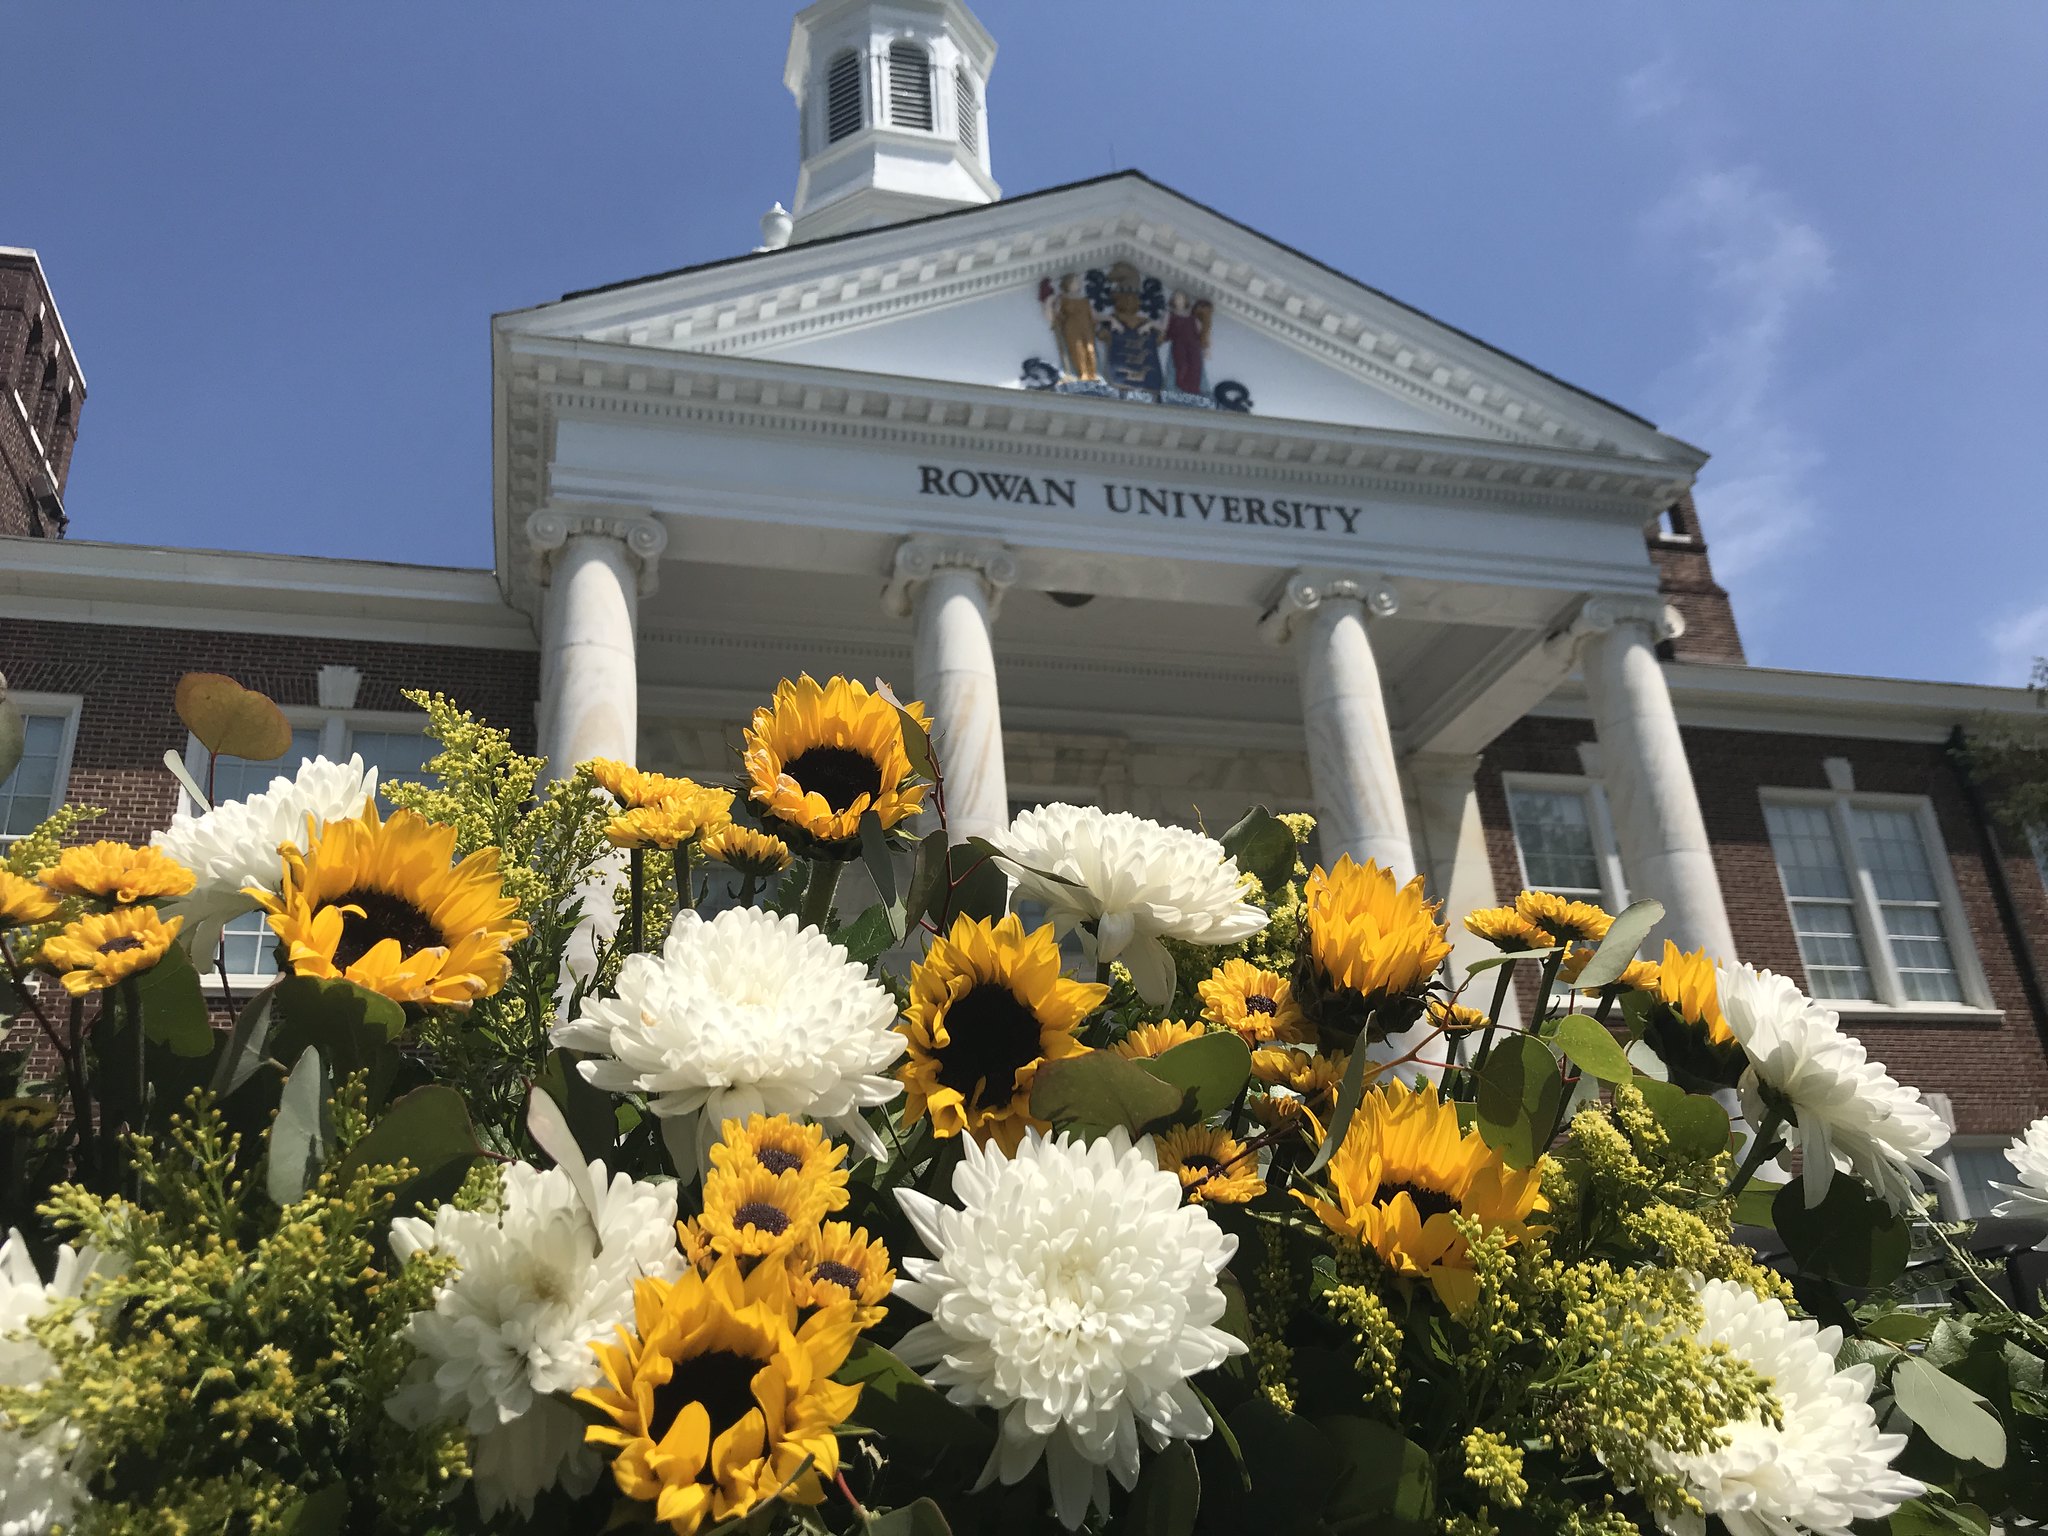 Rowan Univeristy's Bunce Hall with sunflowers in front.